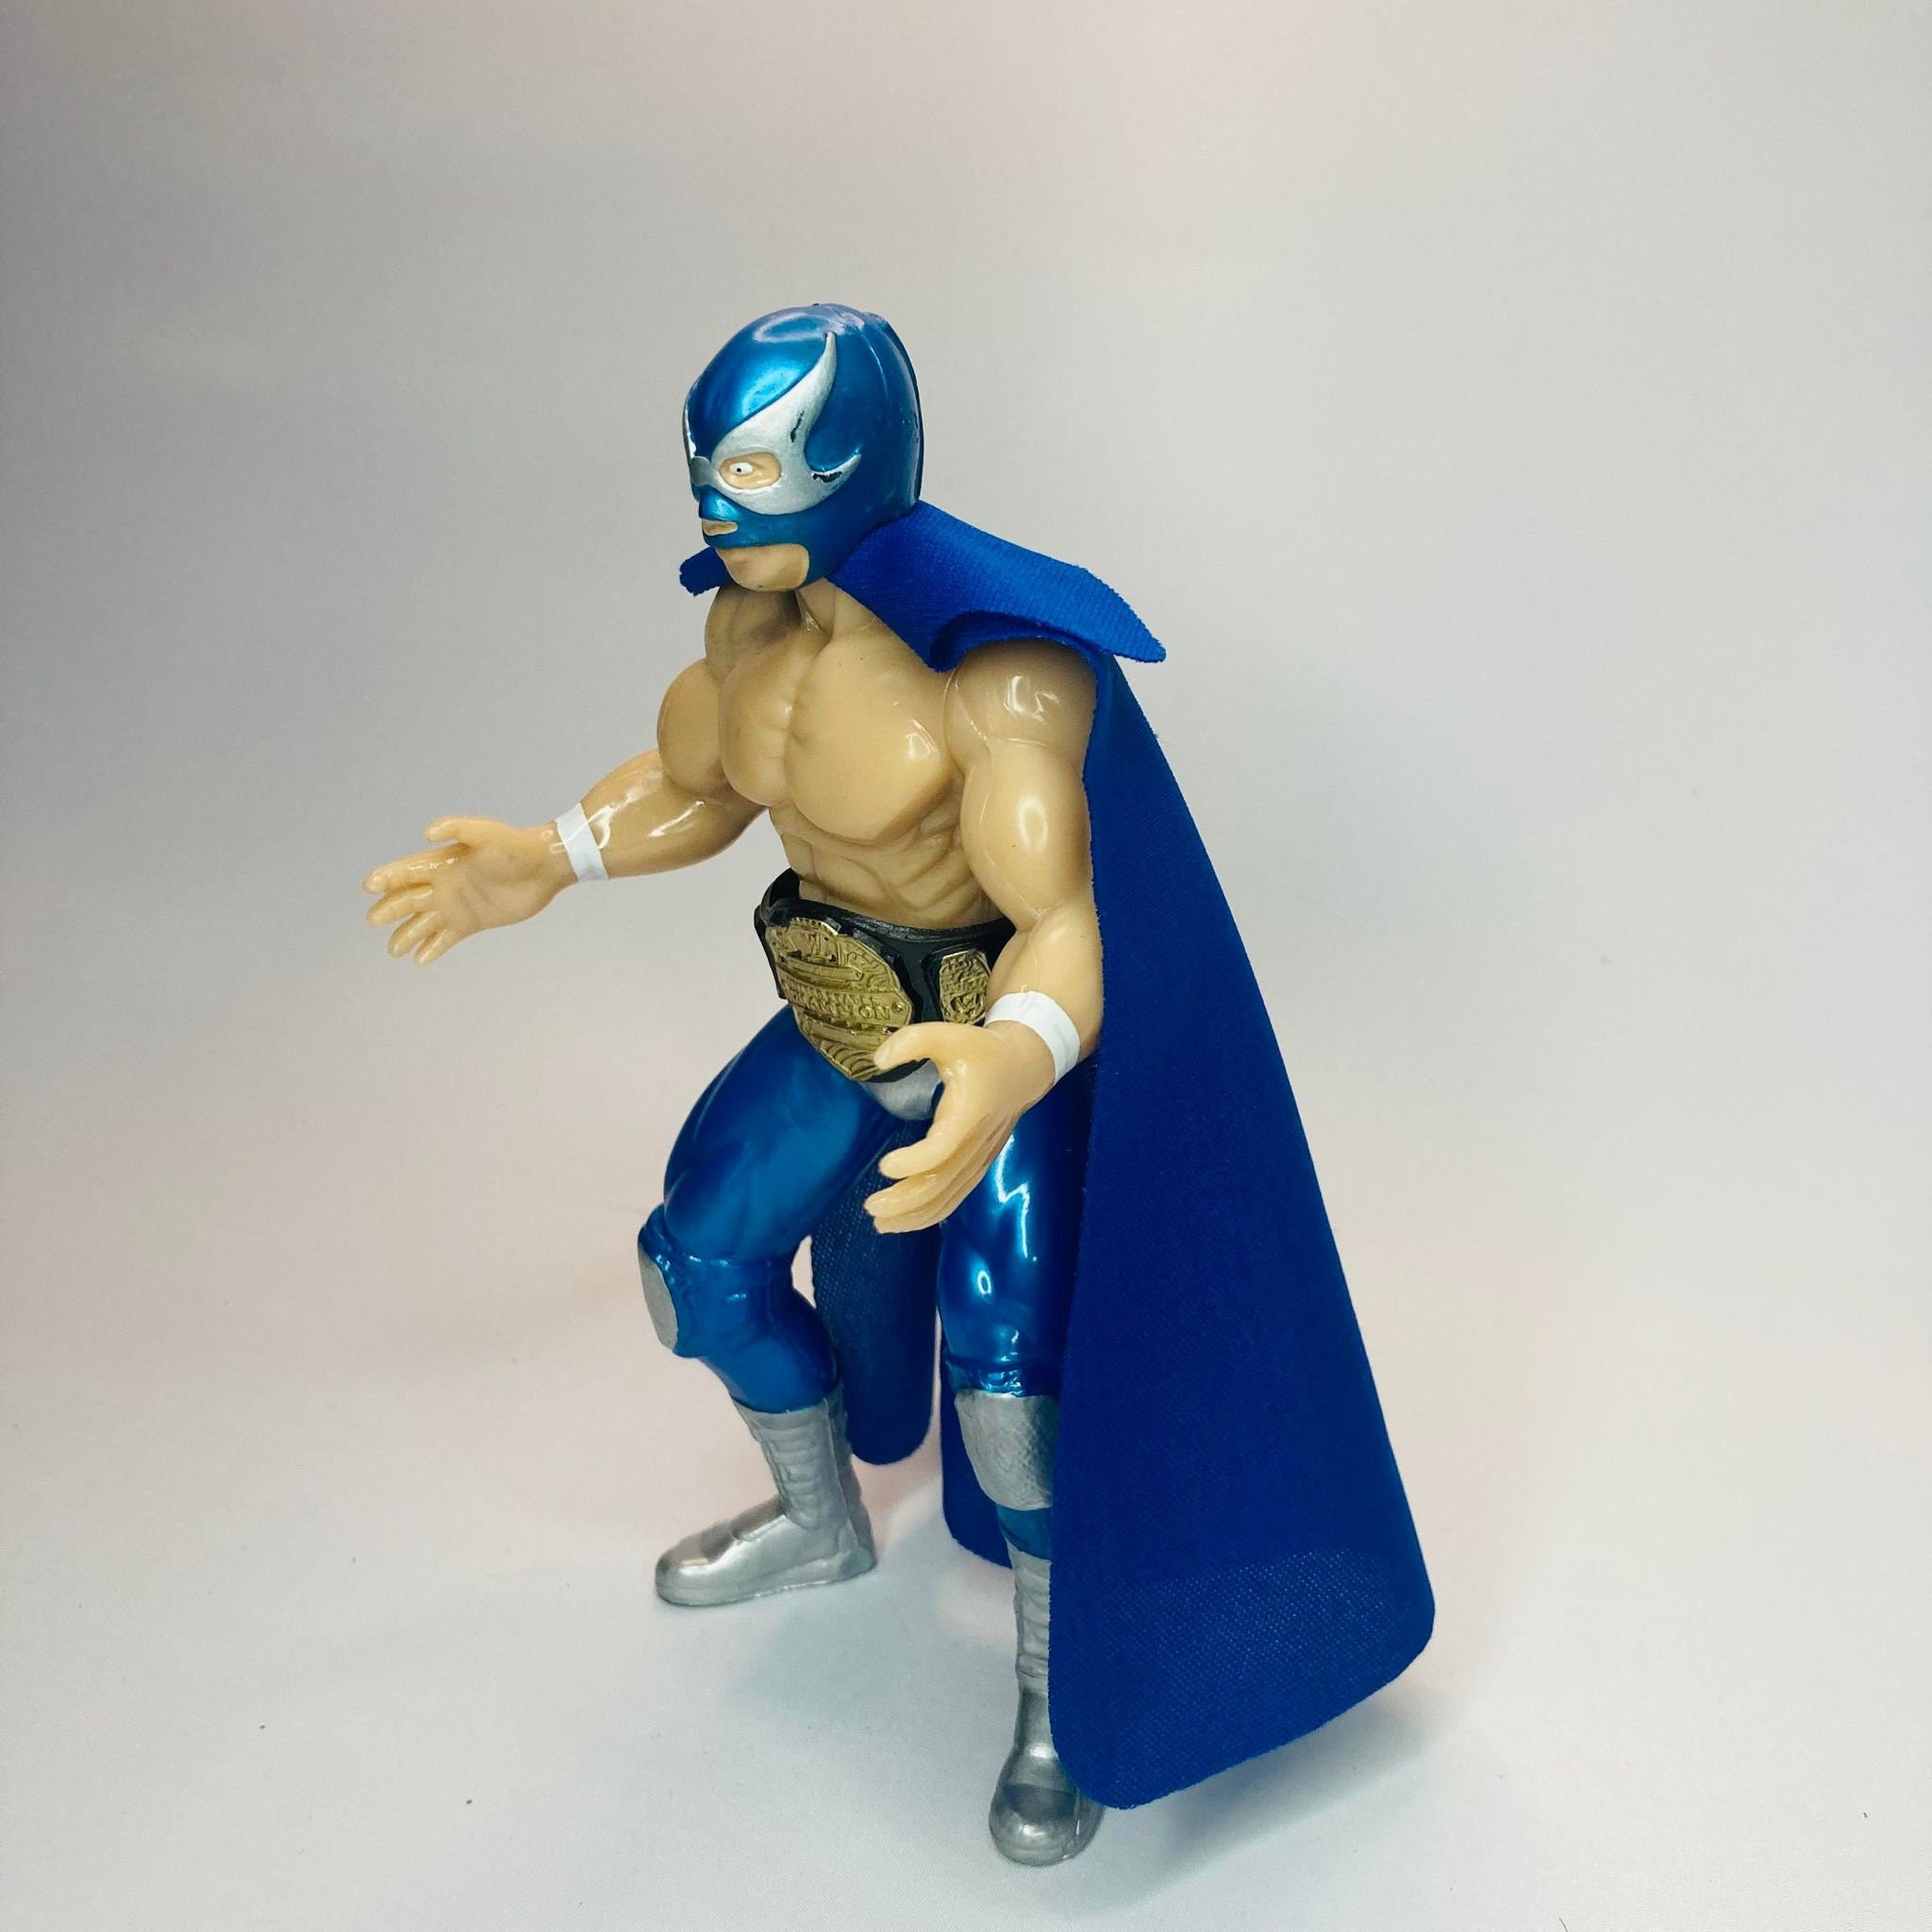 RARE LIZMARK MEXICAN CMLL Toymakers Wrestling Figure WCW Lucha Libre SHIPS FREE 